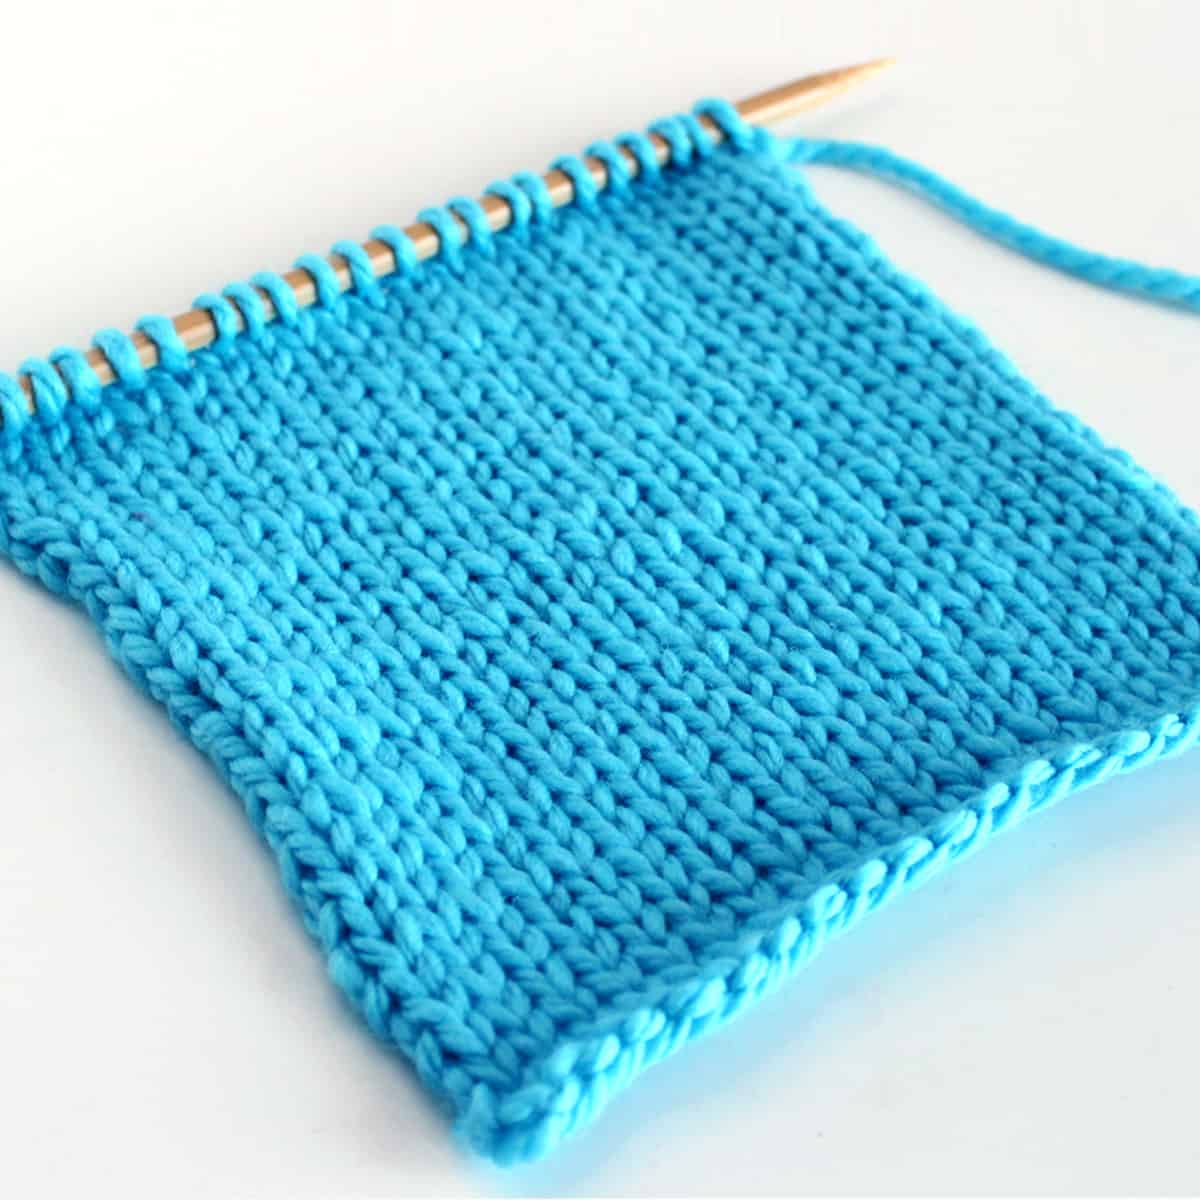 Stockinette Stitch flat on knitting needle in blue color yarn.